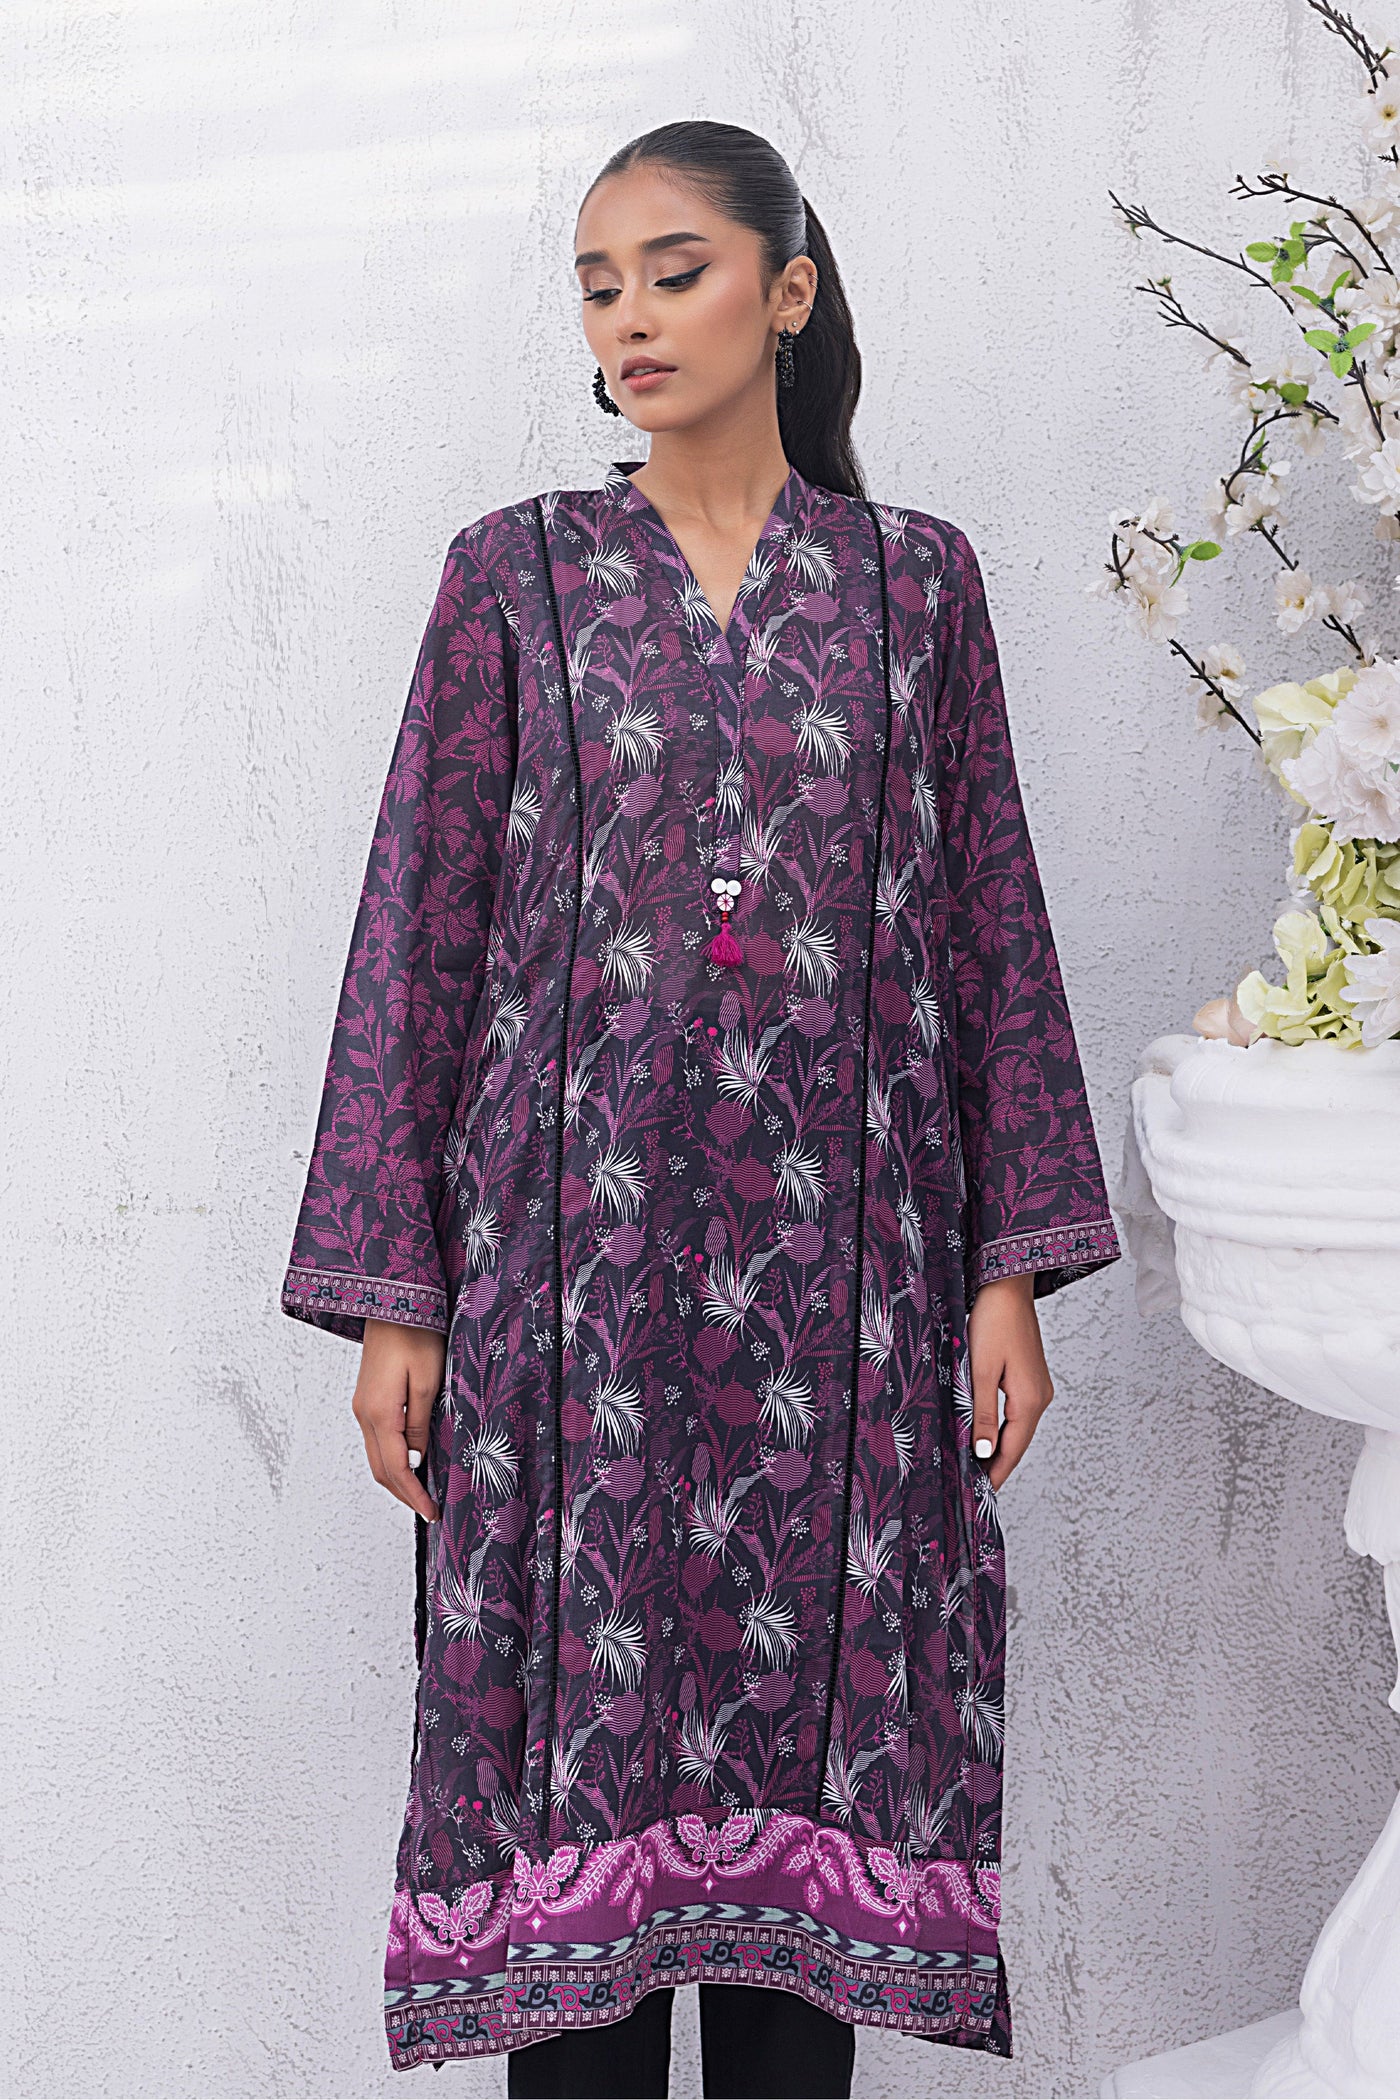 Lakhany 01 Piece Unstitched Printed Lawn Shirt - LG-MM-0001